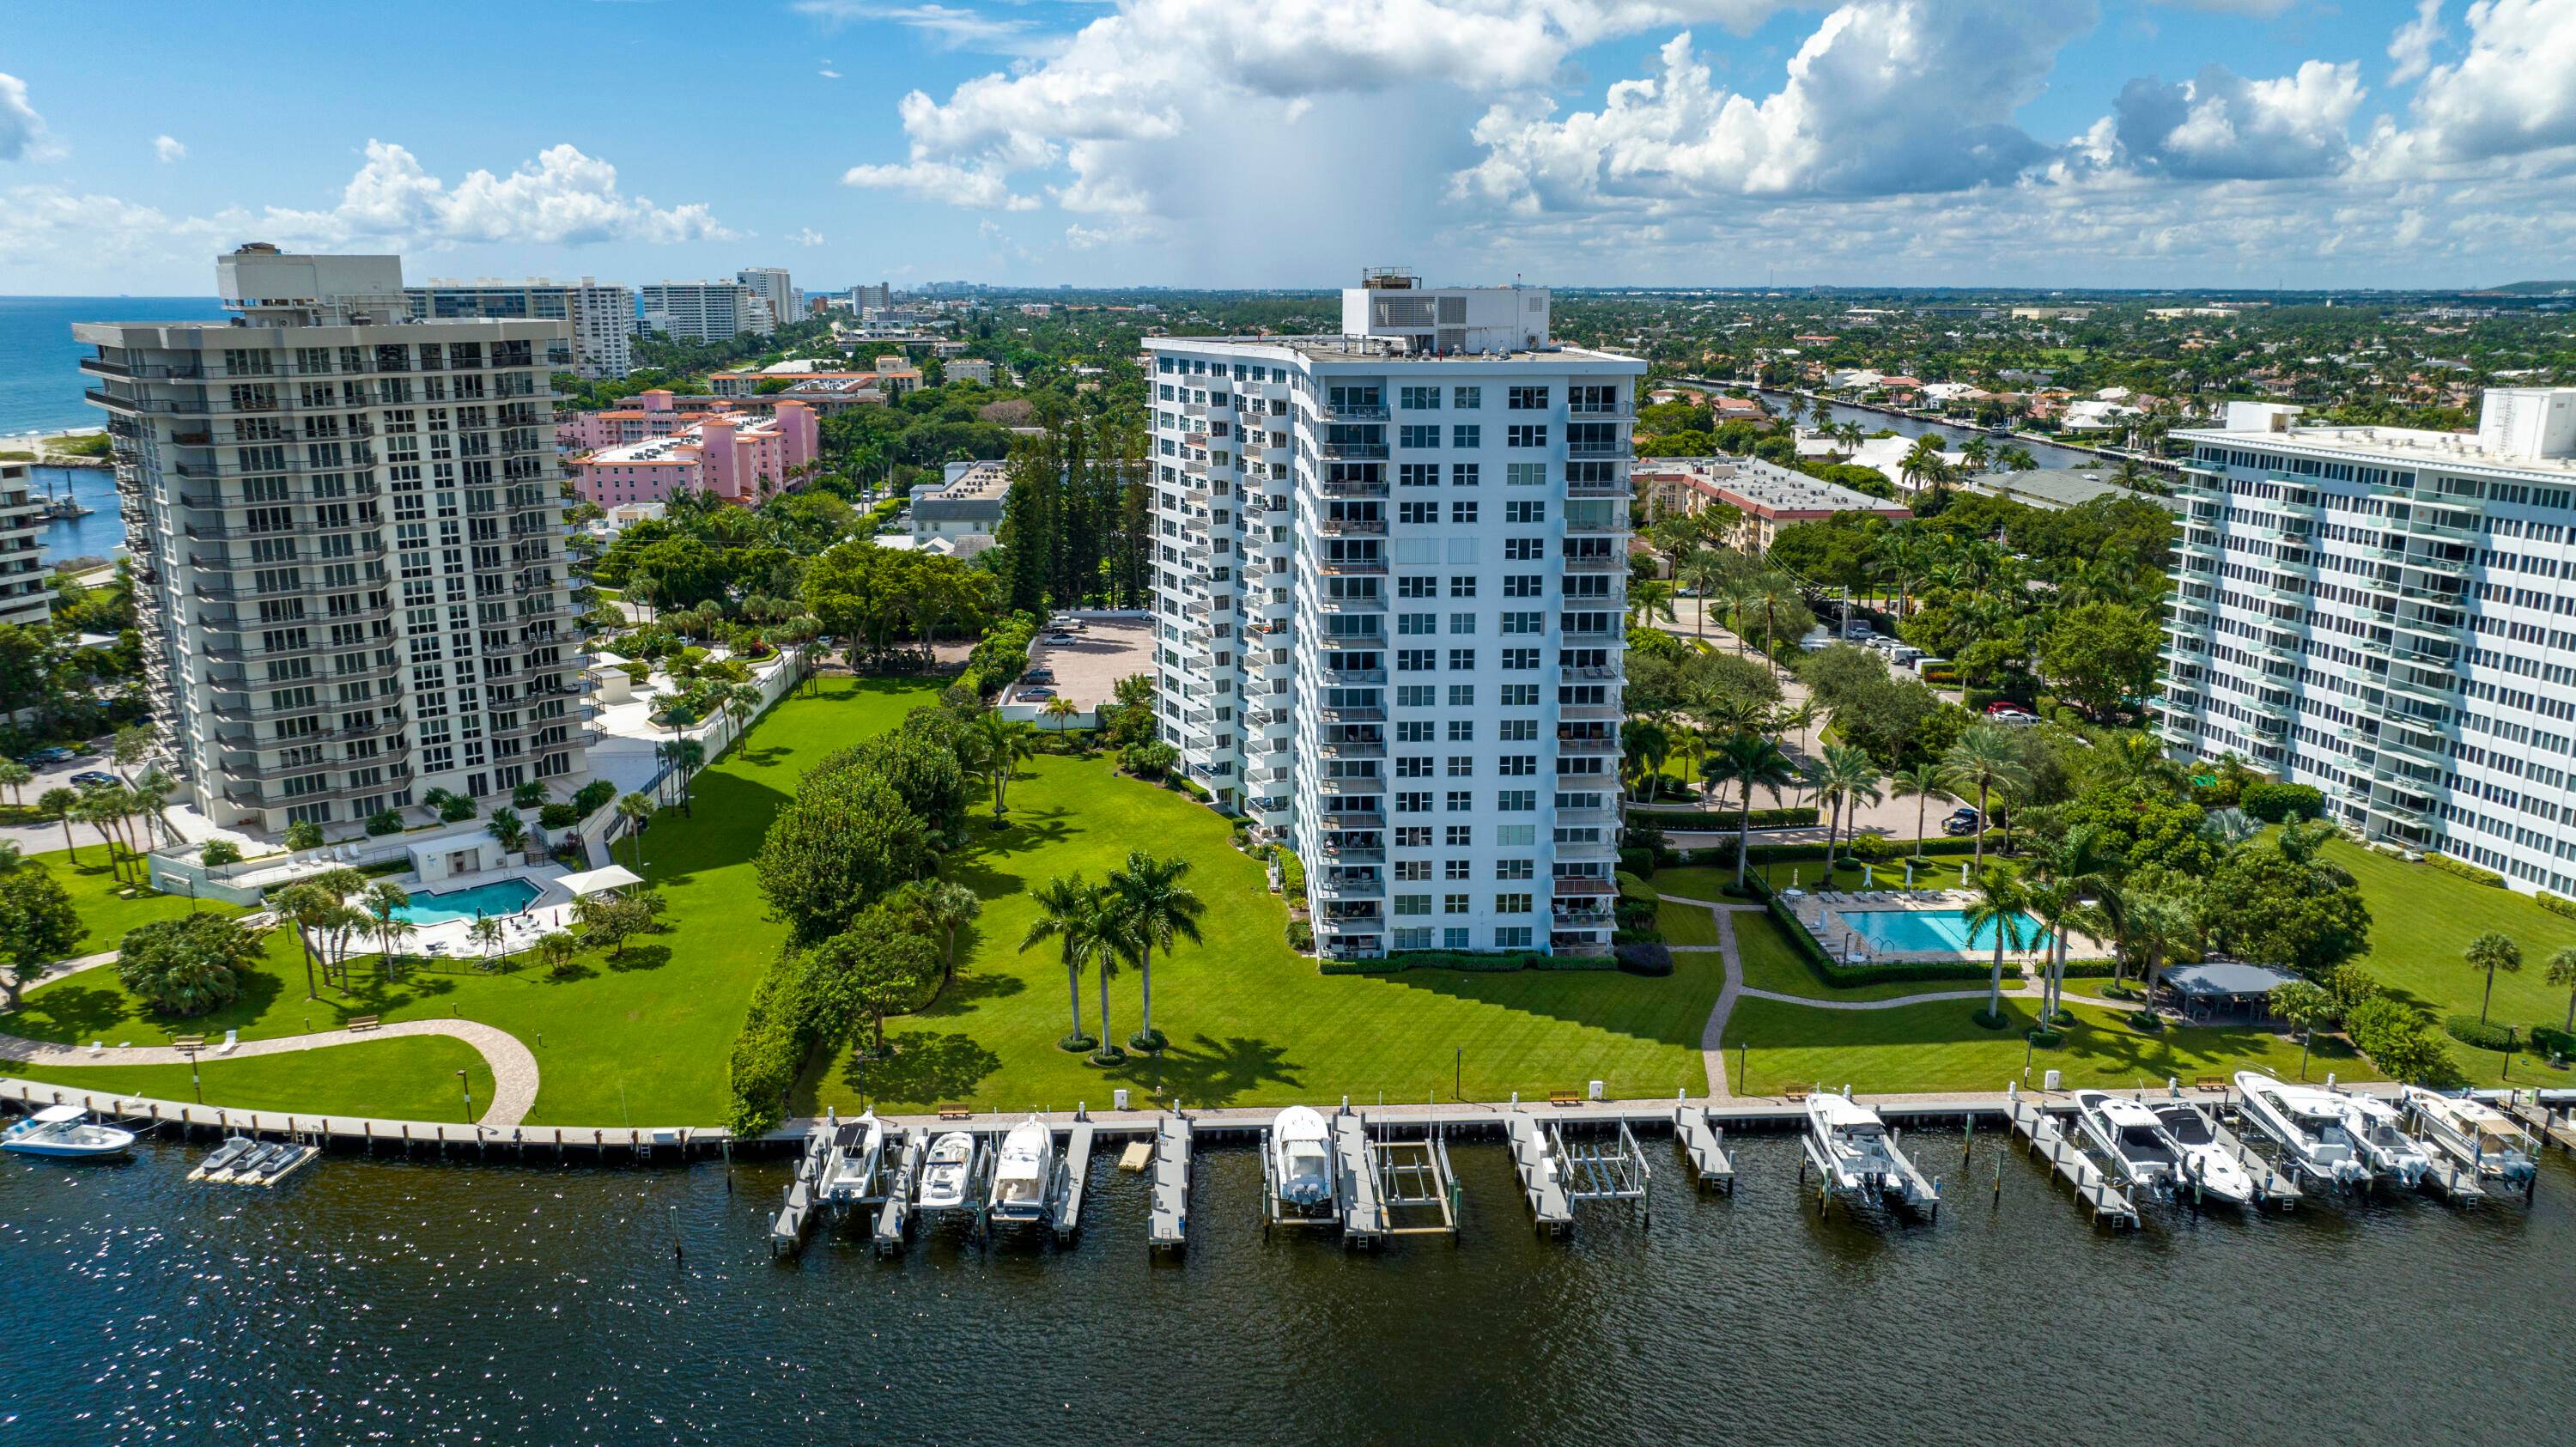 An exclusive boutique 17 story condominium, Lake House South stands majestically on the southern shore of Lake Boca Raton on the Intracoastal Waterway, where vistas sweep to the Atlantic Ocean ...